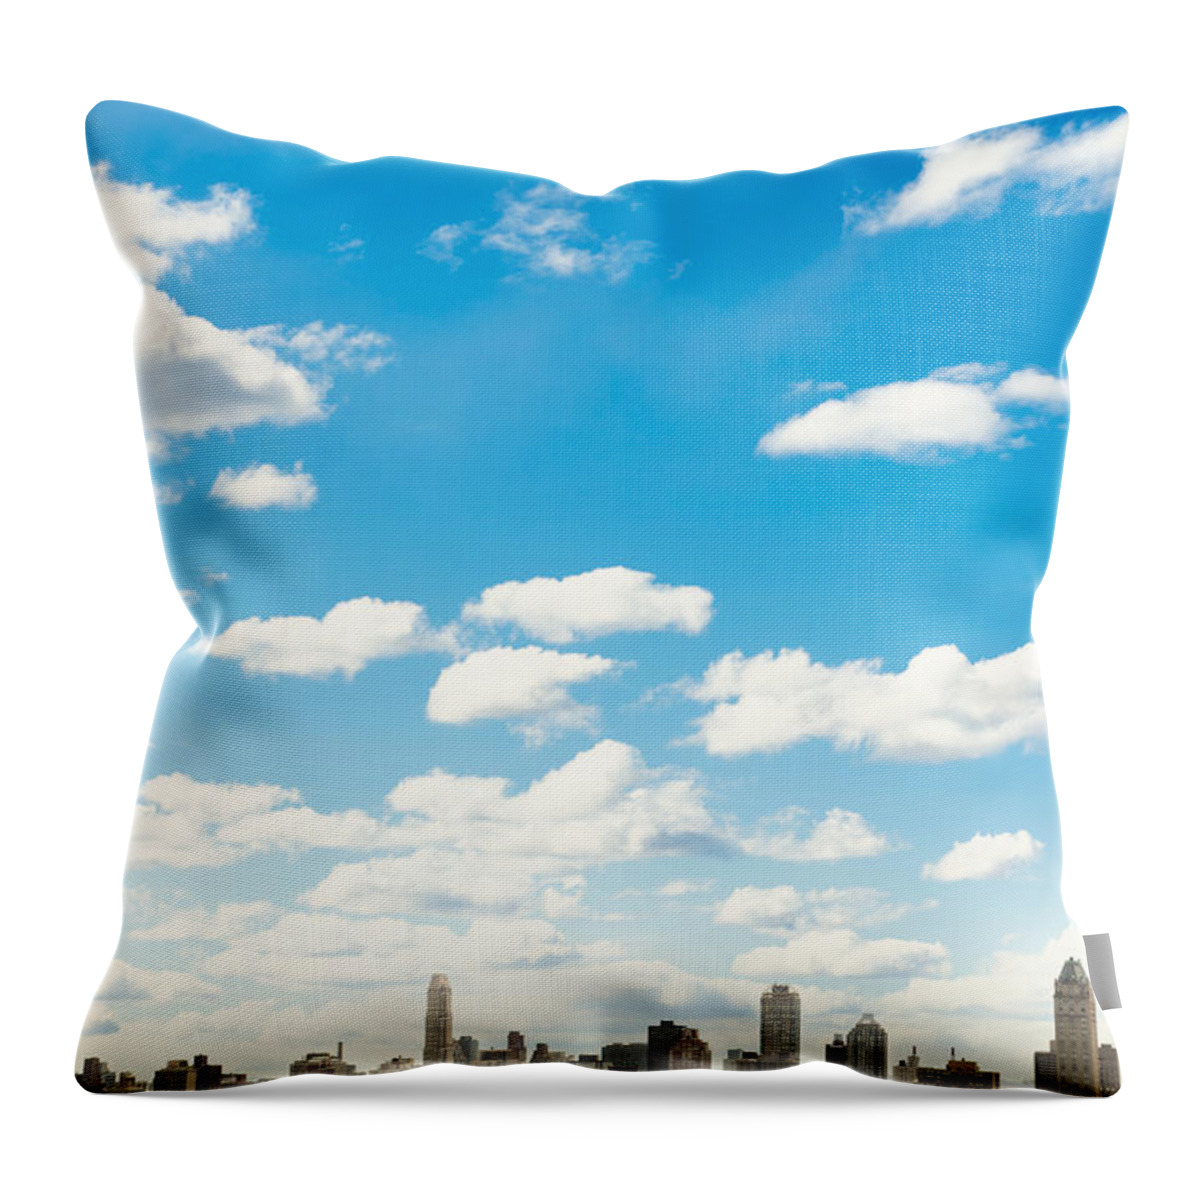 Columbus Circle Throw Pillow featuring the photograph Central Park And Skyline From by Franckreporter